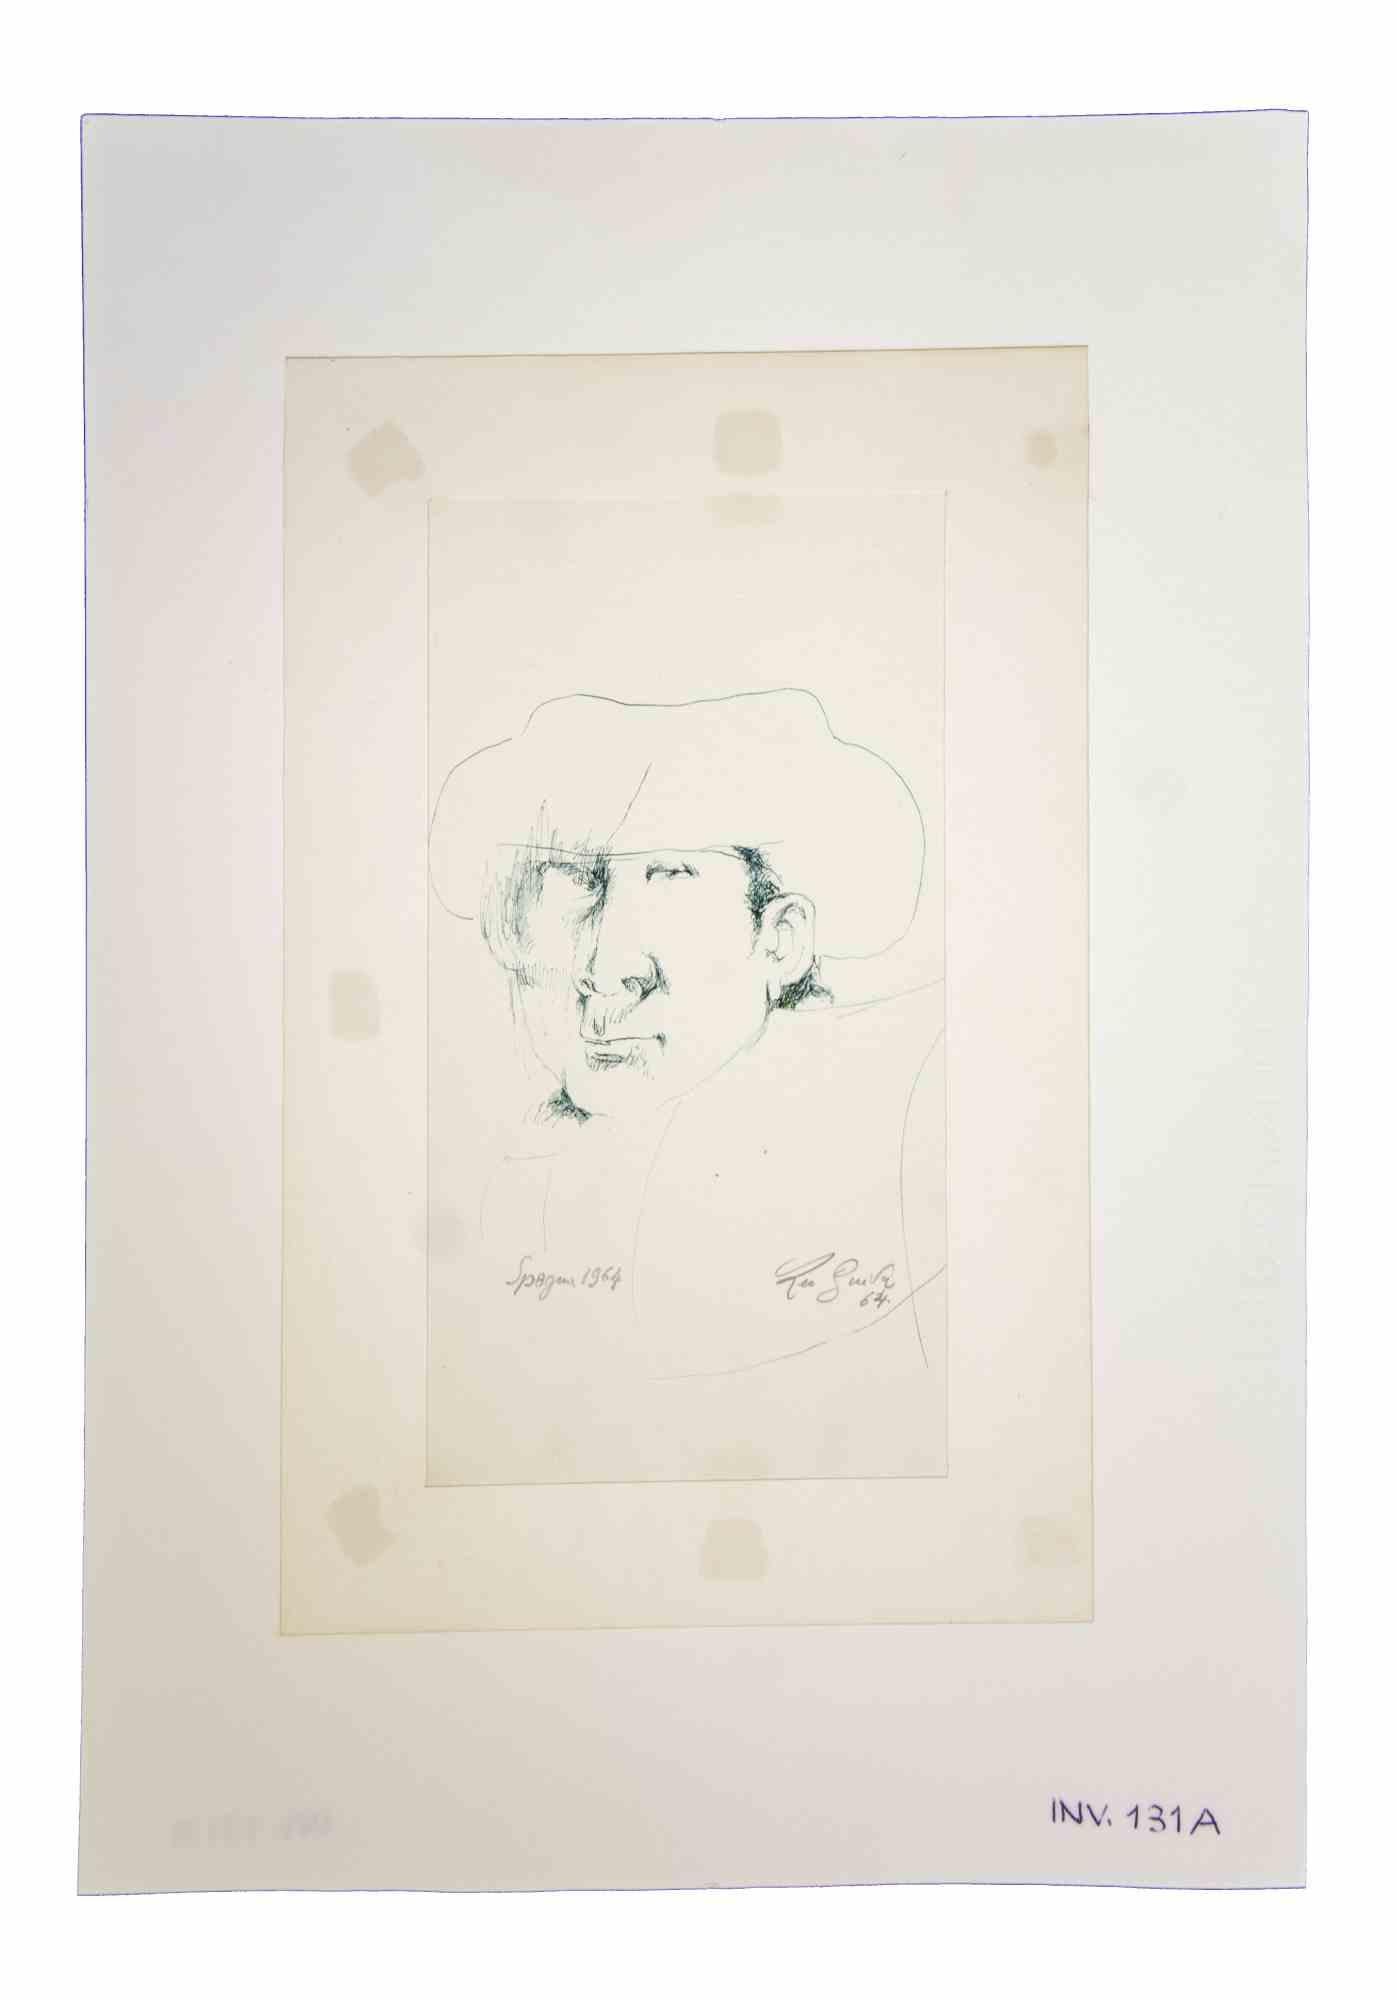 Matador is an original contemporary artwork realized in the 1964 by the Italian Contemporary artist  Leo Guida  (1992 - 2017).

Original drawings in pen on paper.

Good conditions but aged.

The artwork is depicted through strong strokes in